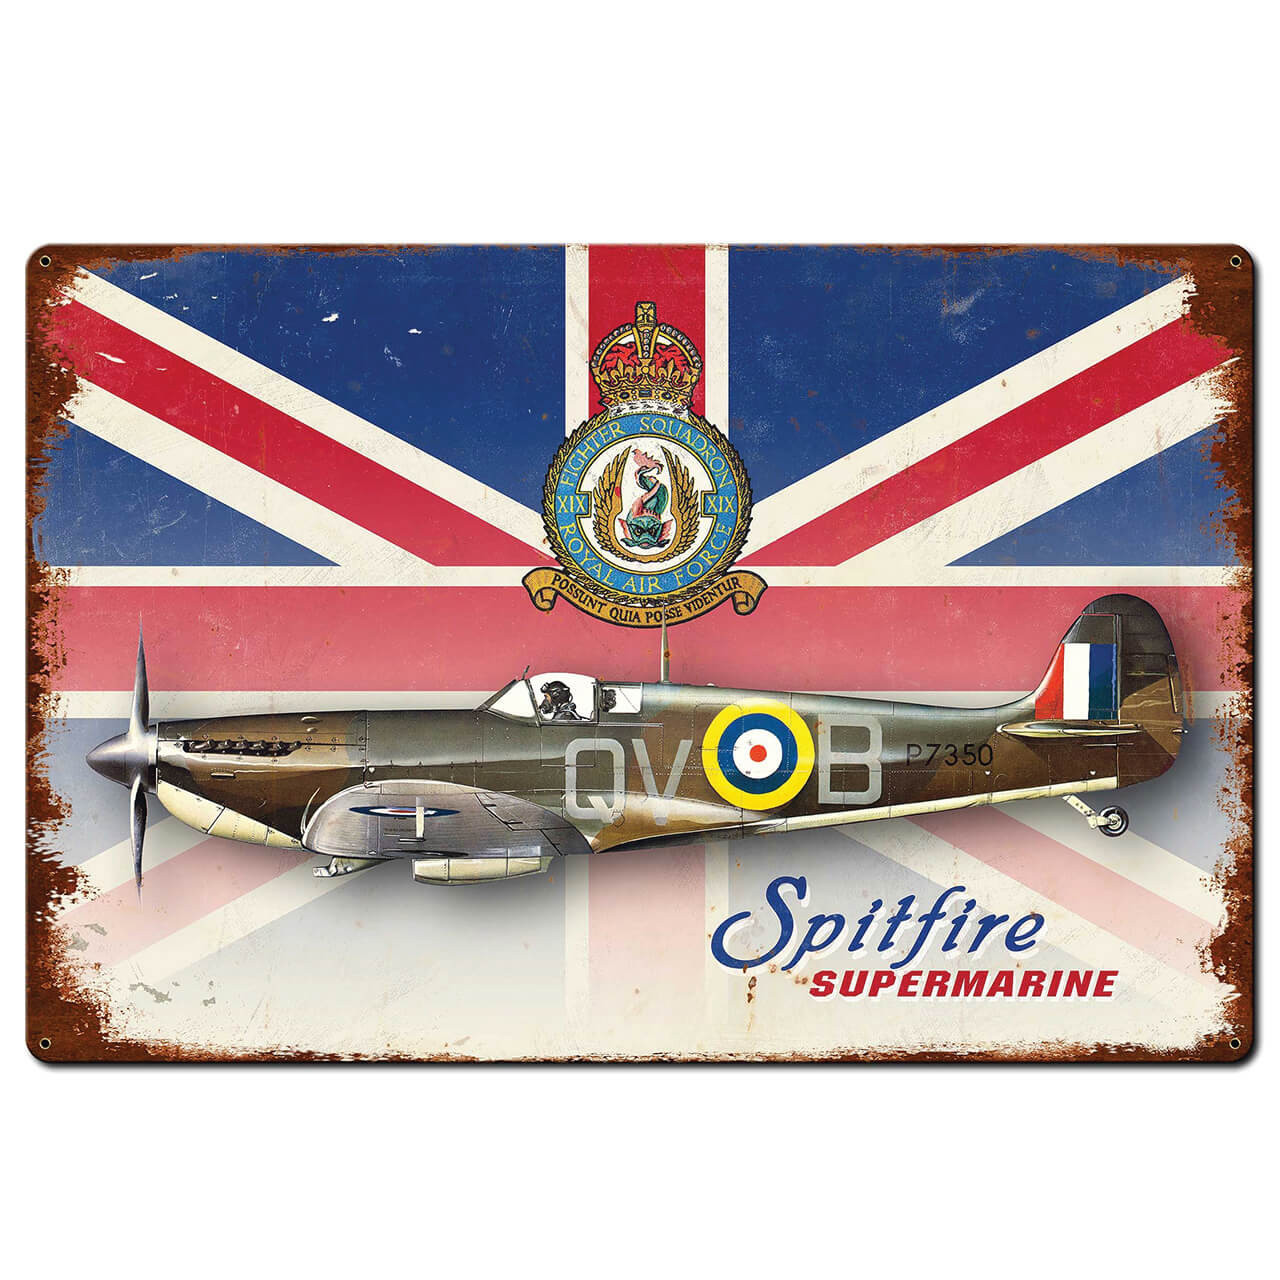 Spitfire Union Jack Metal Sign 36 x 24 Inches